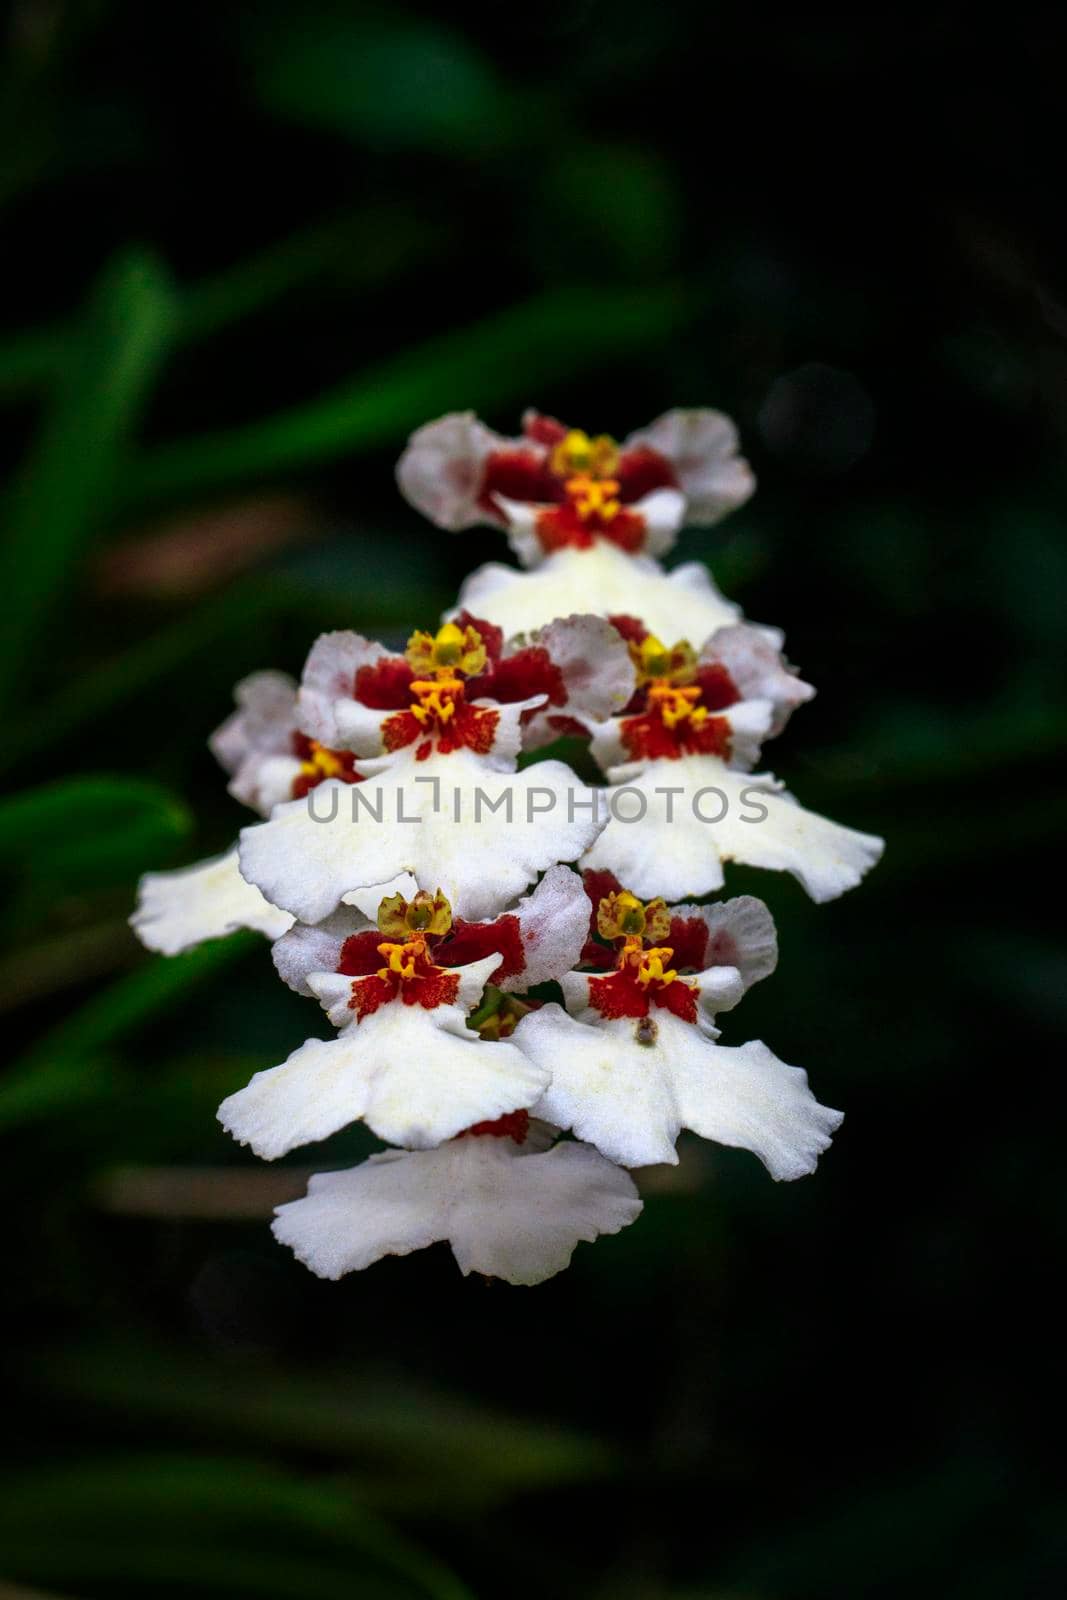 Image of white oncidium orchid flowers in the garden.